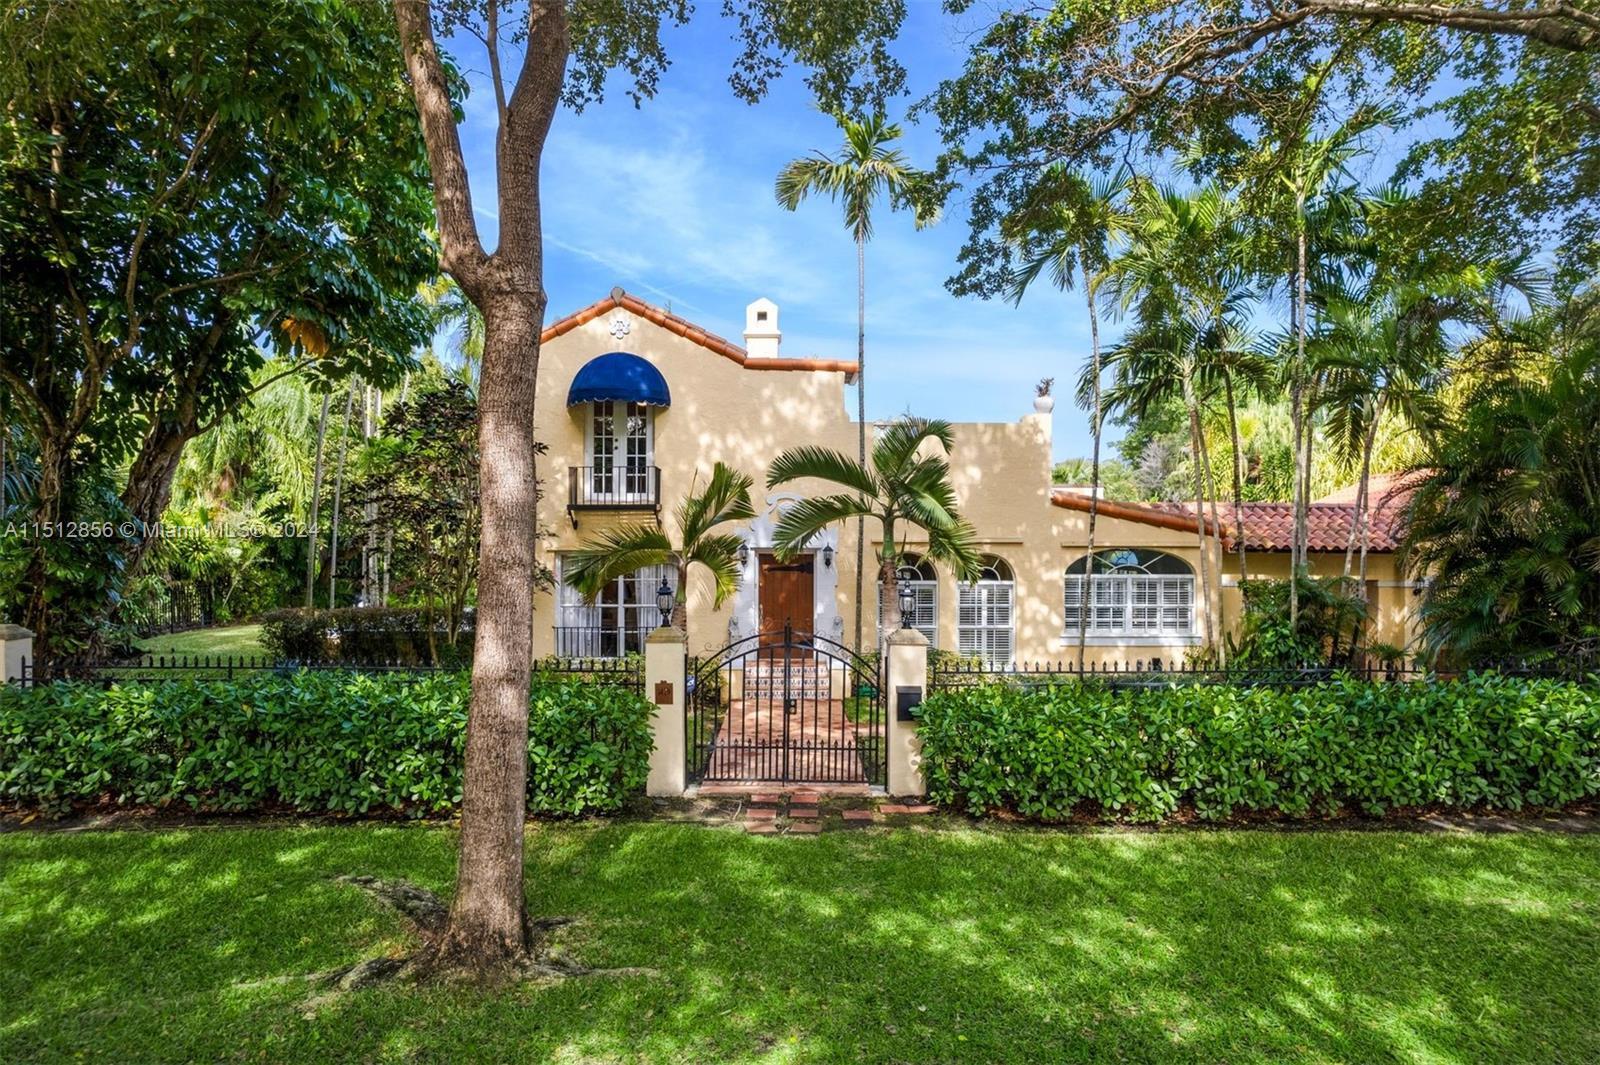 Photo of 1429 Garcia Ave in Coral Gables, FL